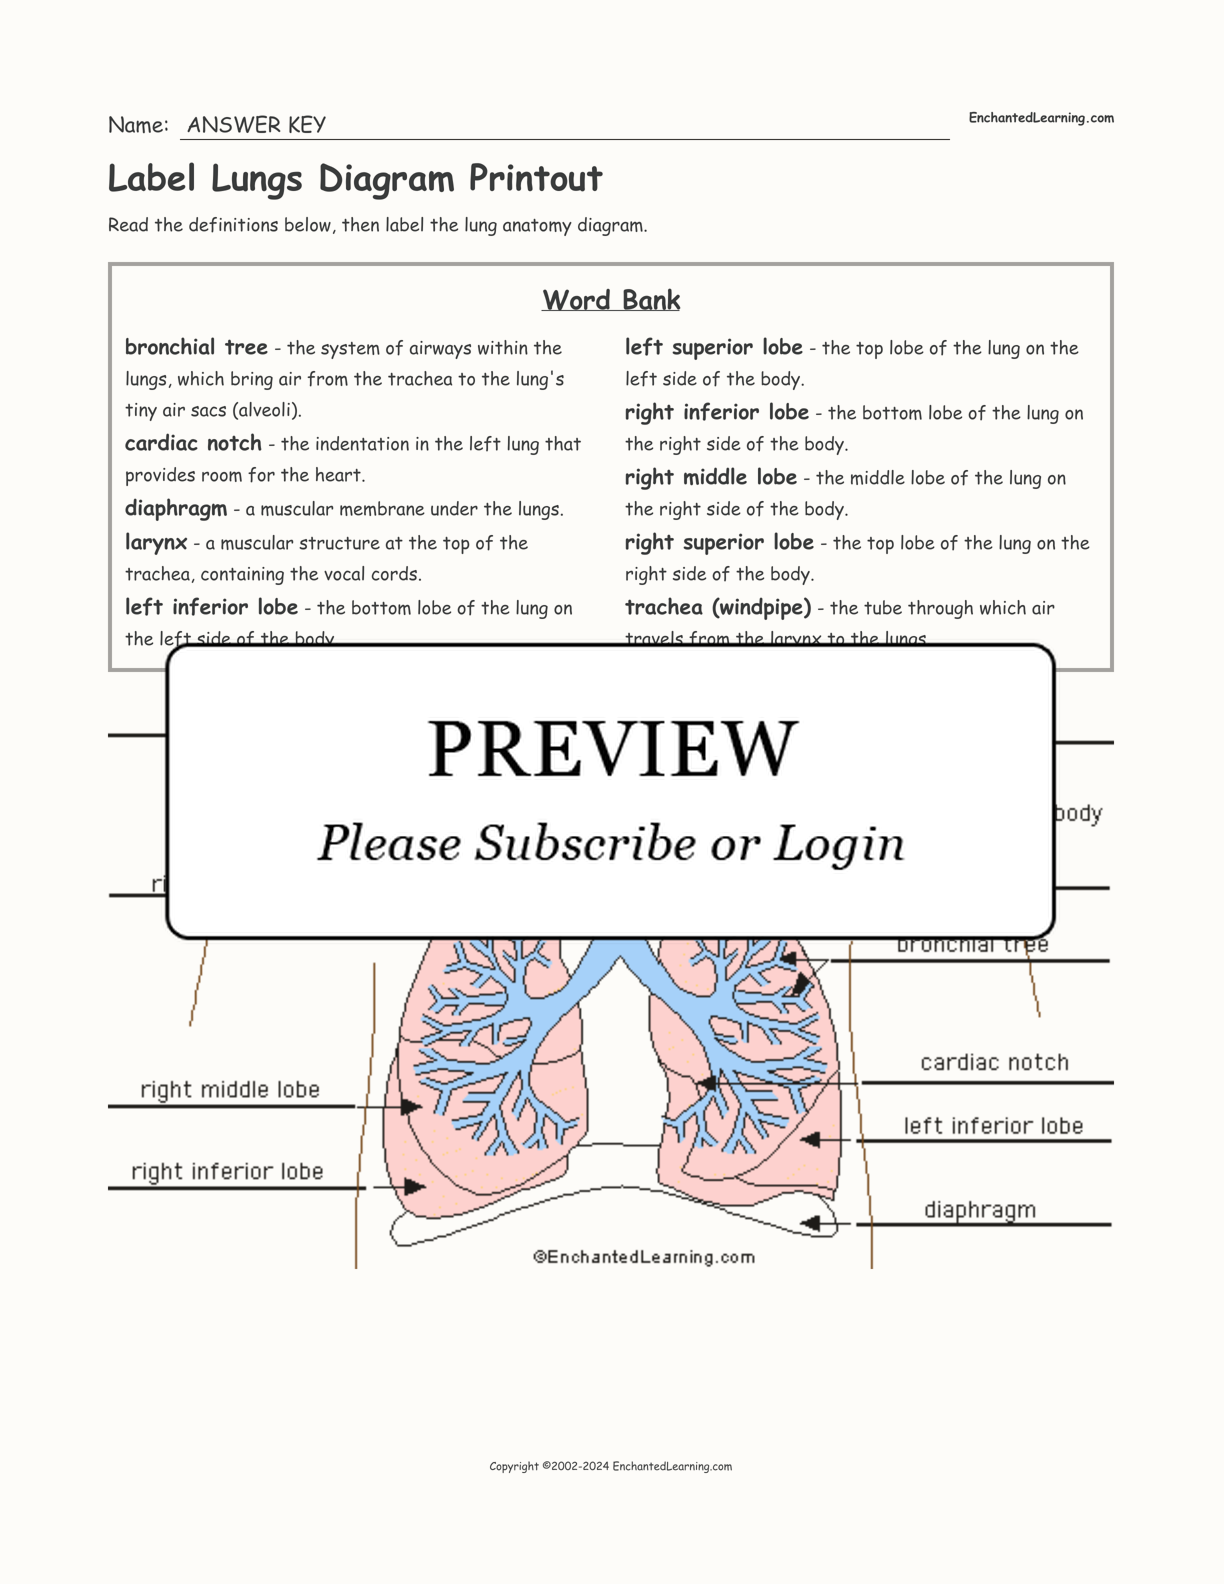 Label Lungs Diagram Printout interactive worksheet page 2